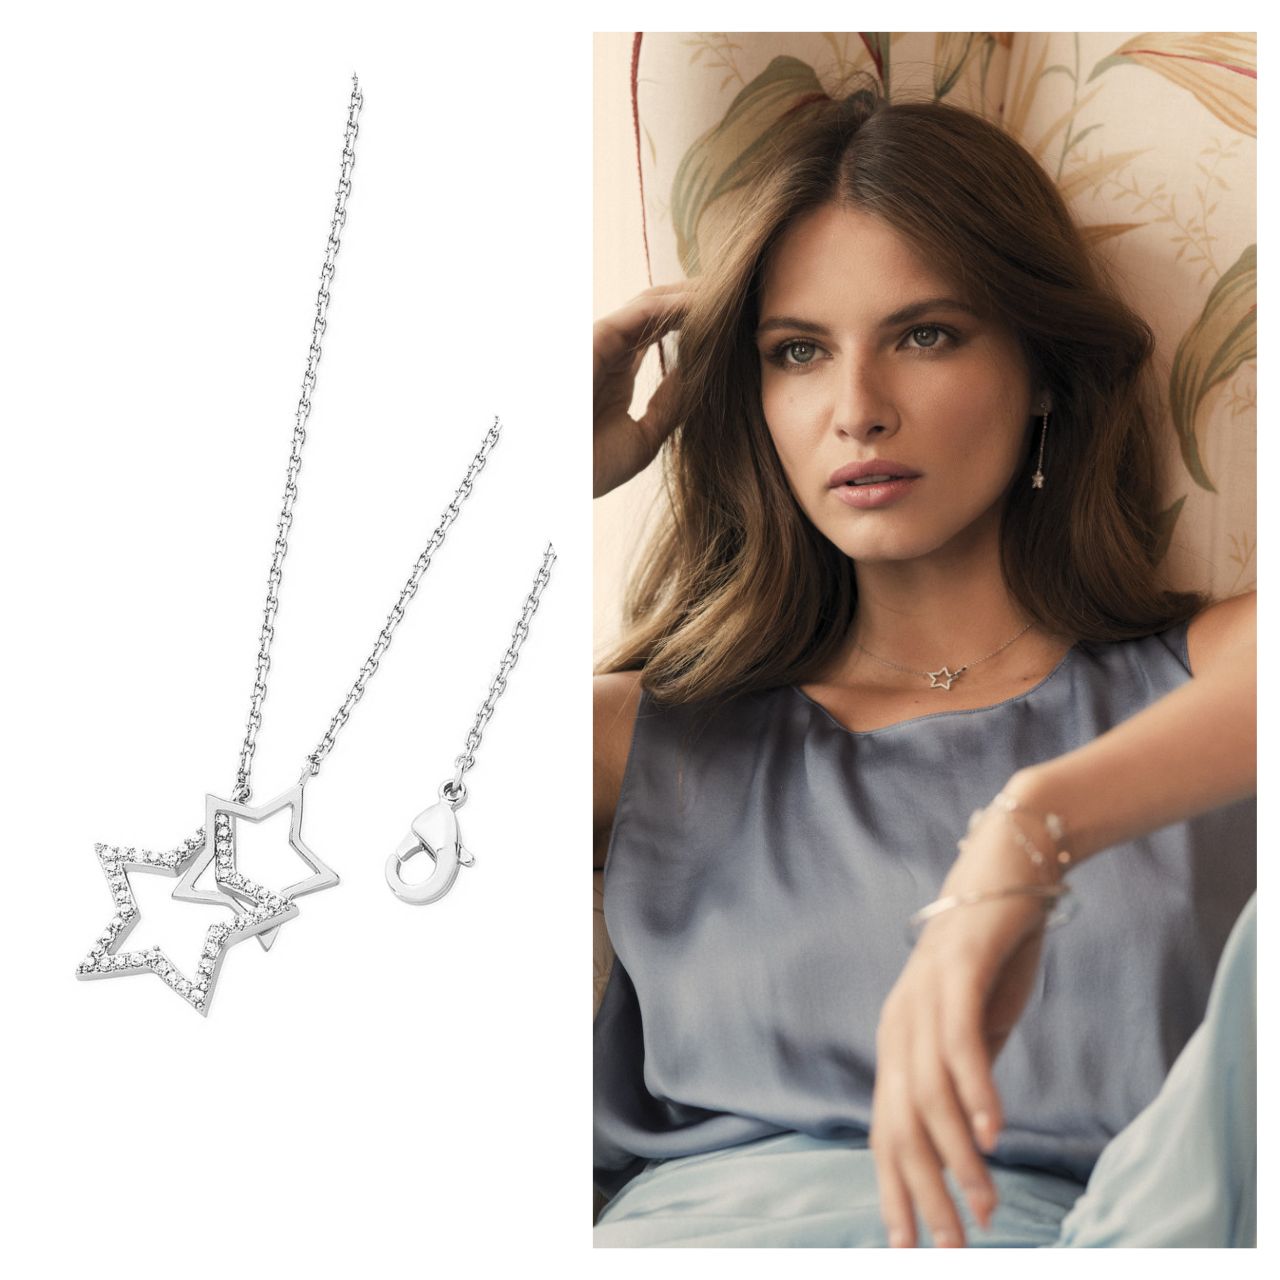 Tipperary Crystal Star Interlocking Pendant Silver  Description These on-trend interlocking stars come in silver. A larger crystal encrusted star is interlocked with a lustrous polished gold star. This pendant suspends from a cable chain which secures safely with a lobster claw clasp.